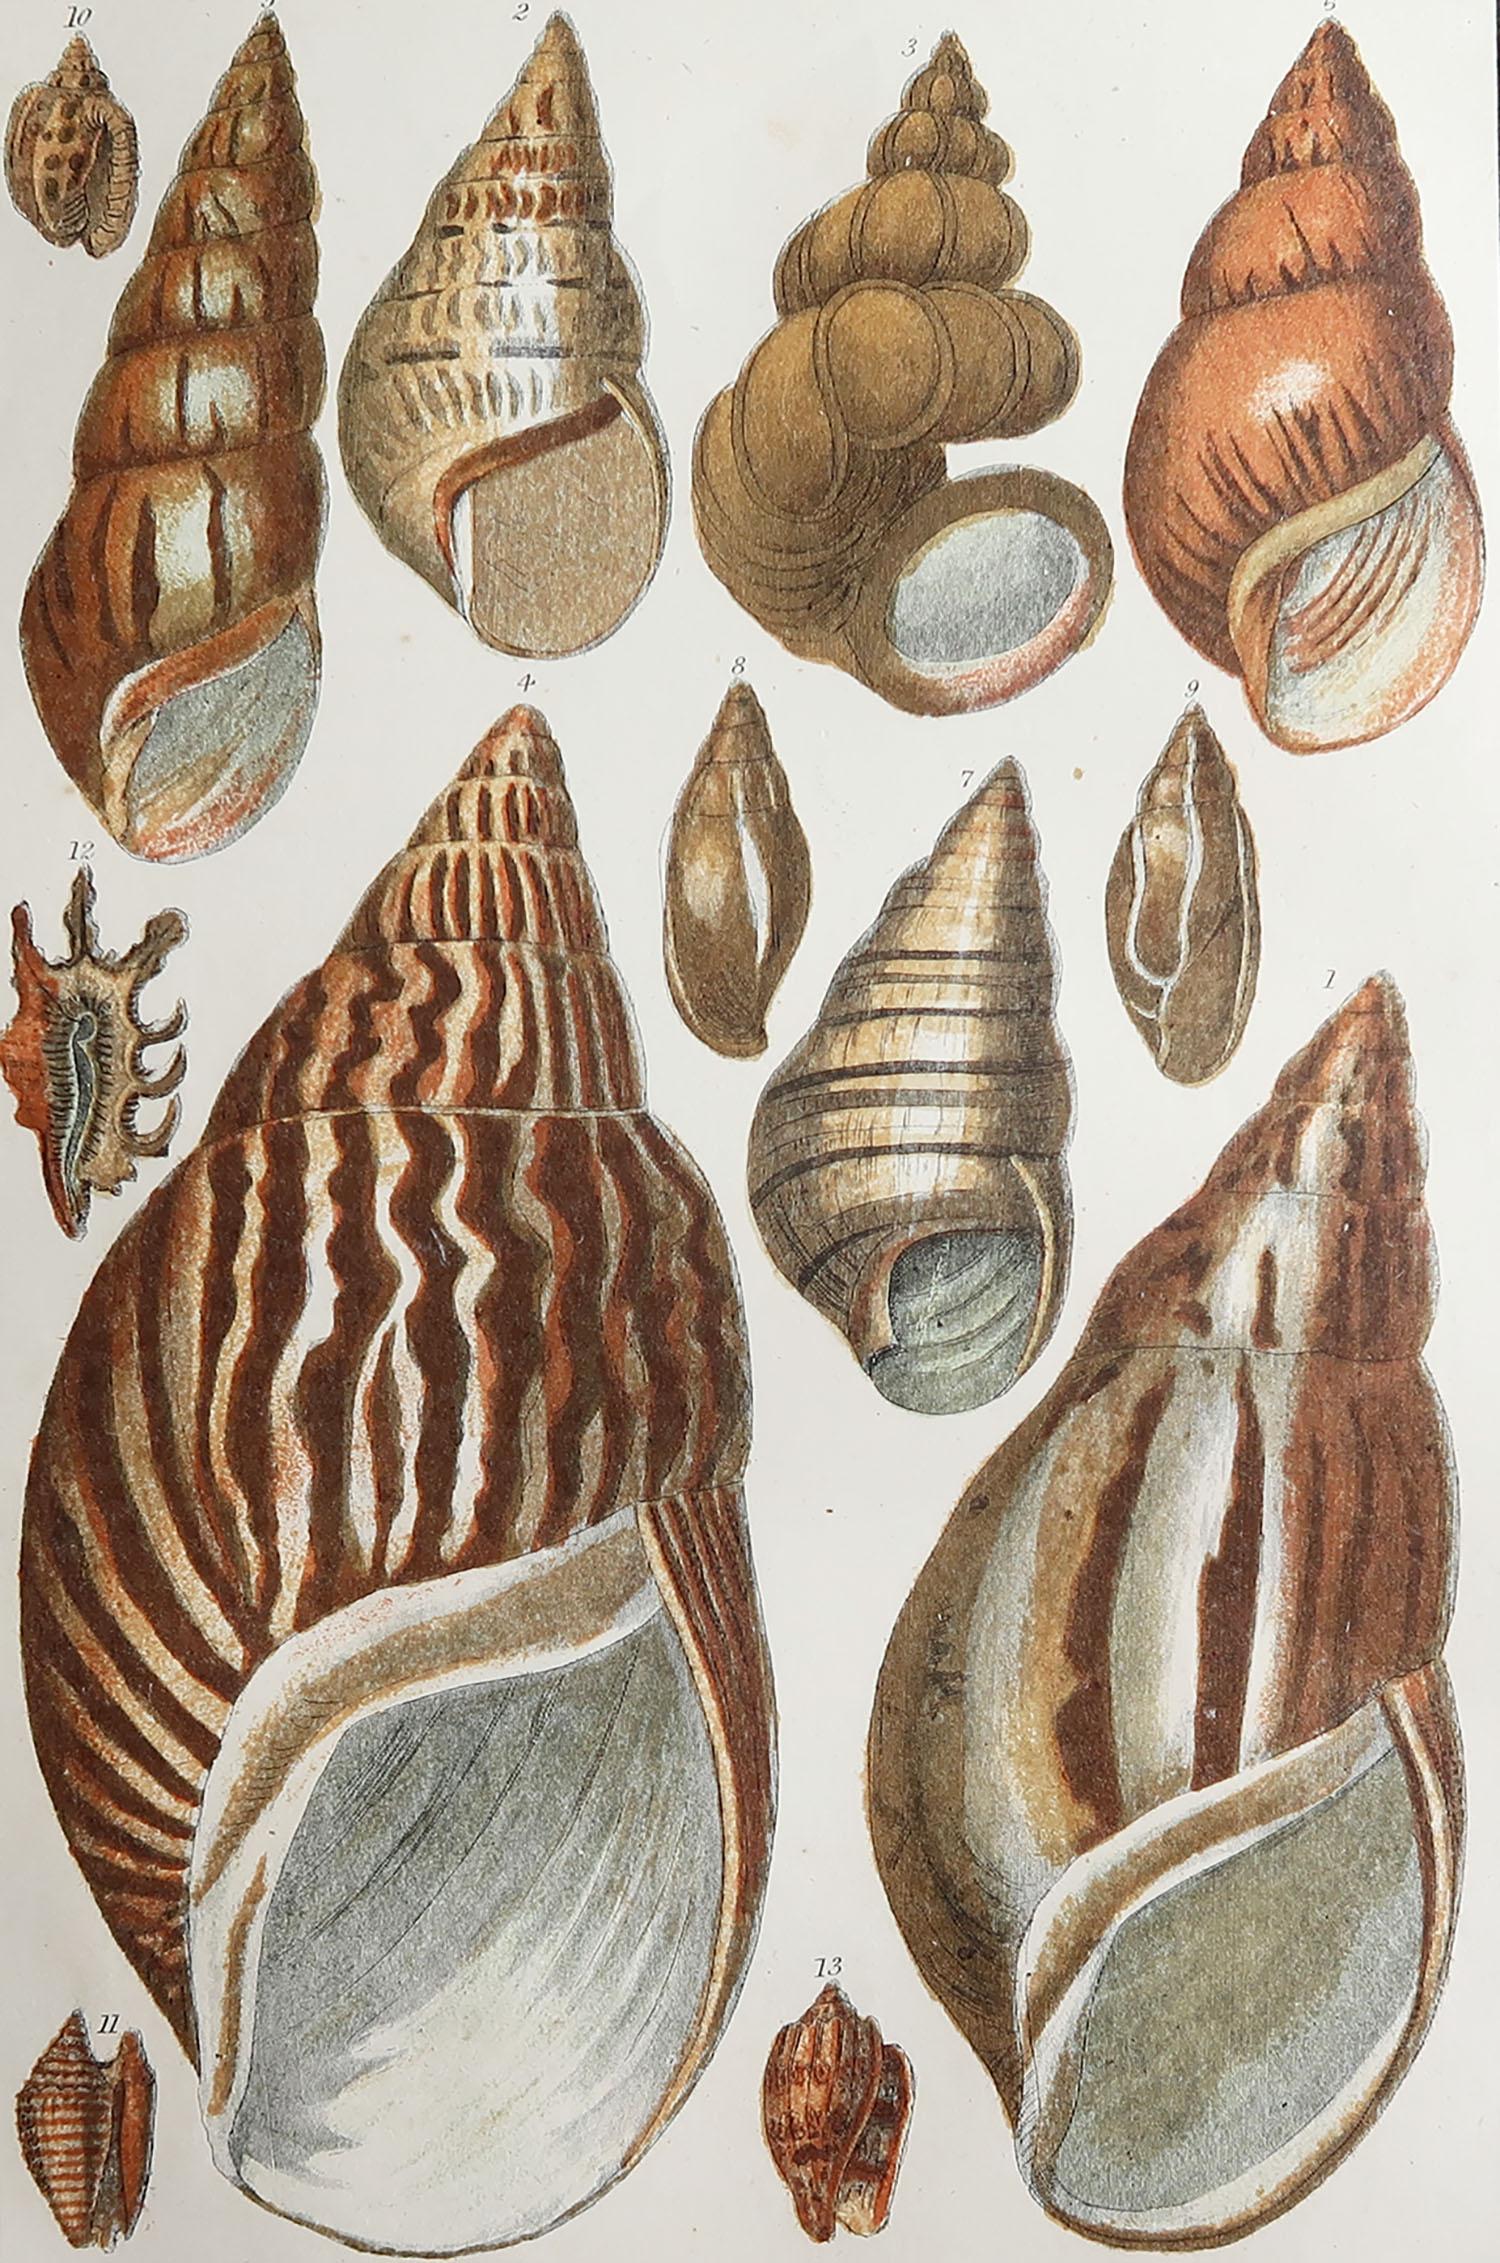 Great image of shells.

Unframed. It gives you the option of perhaps making a set up using your own choice of frames.

Lithograph after Cpt. brown with original hand color.

Published, 1847.

Free shipping.






